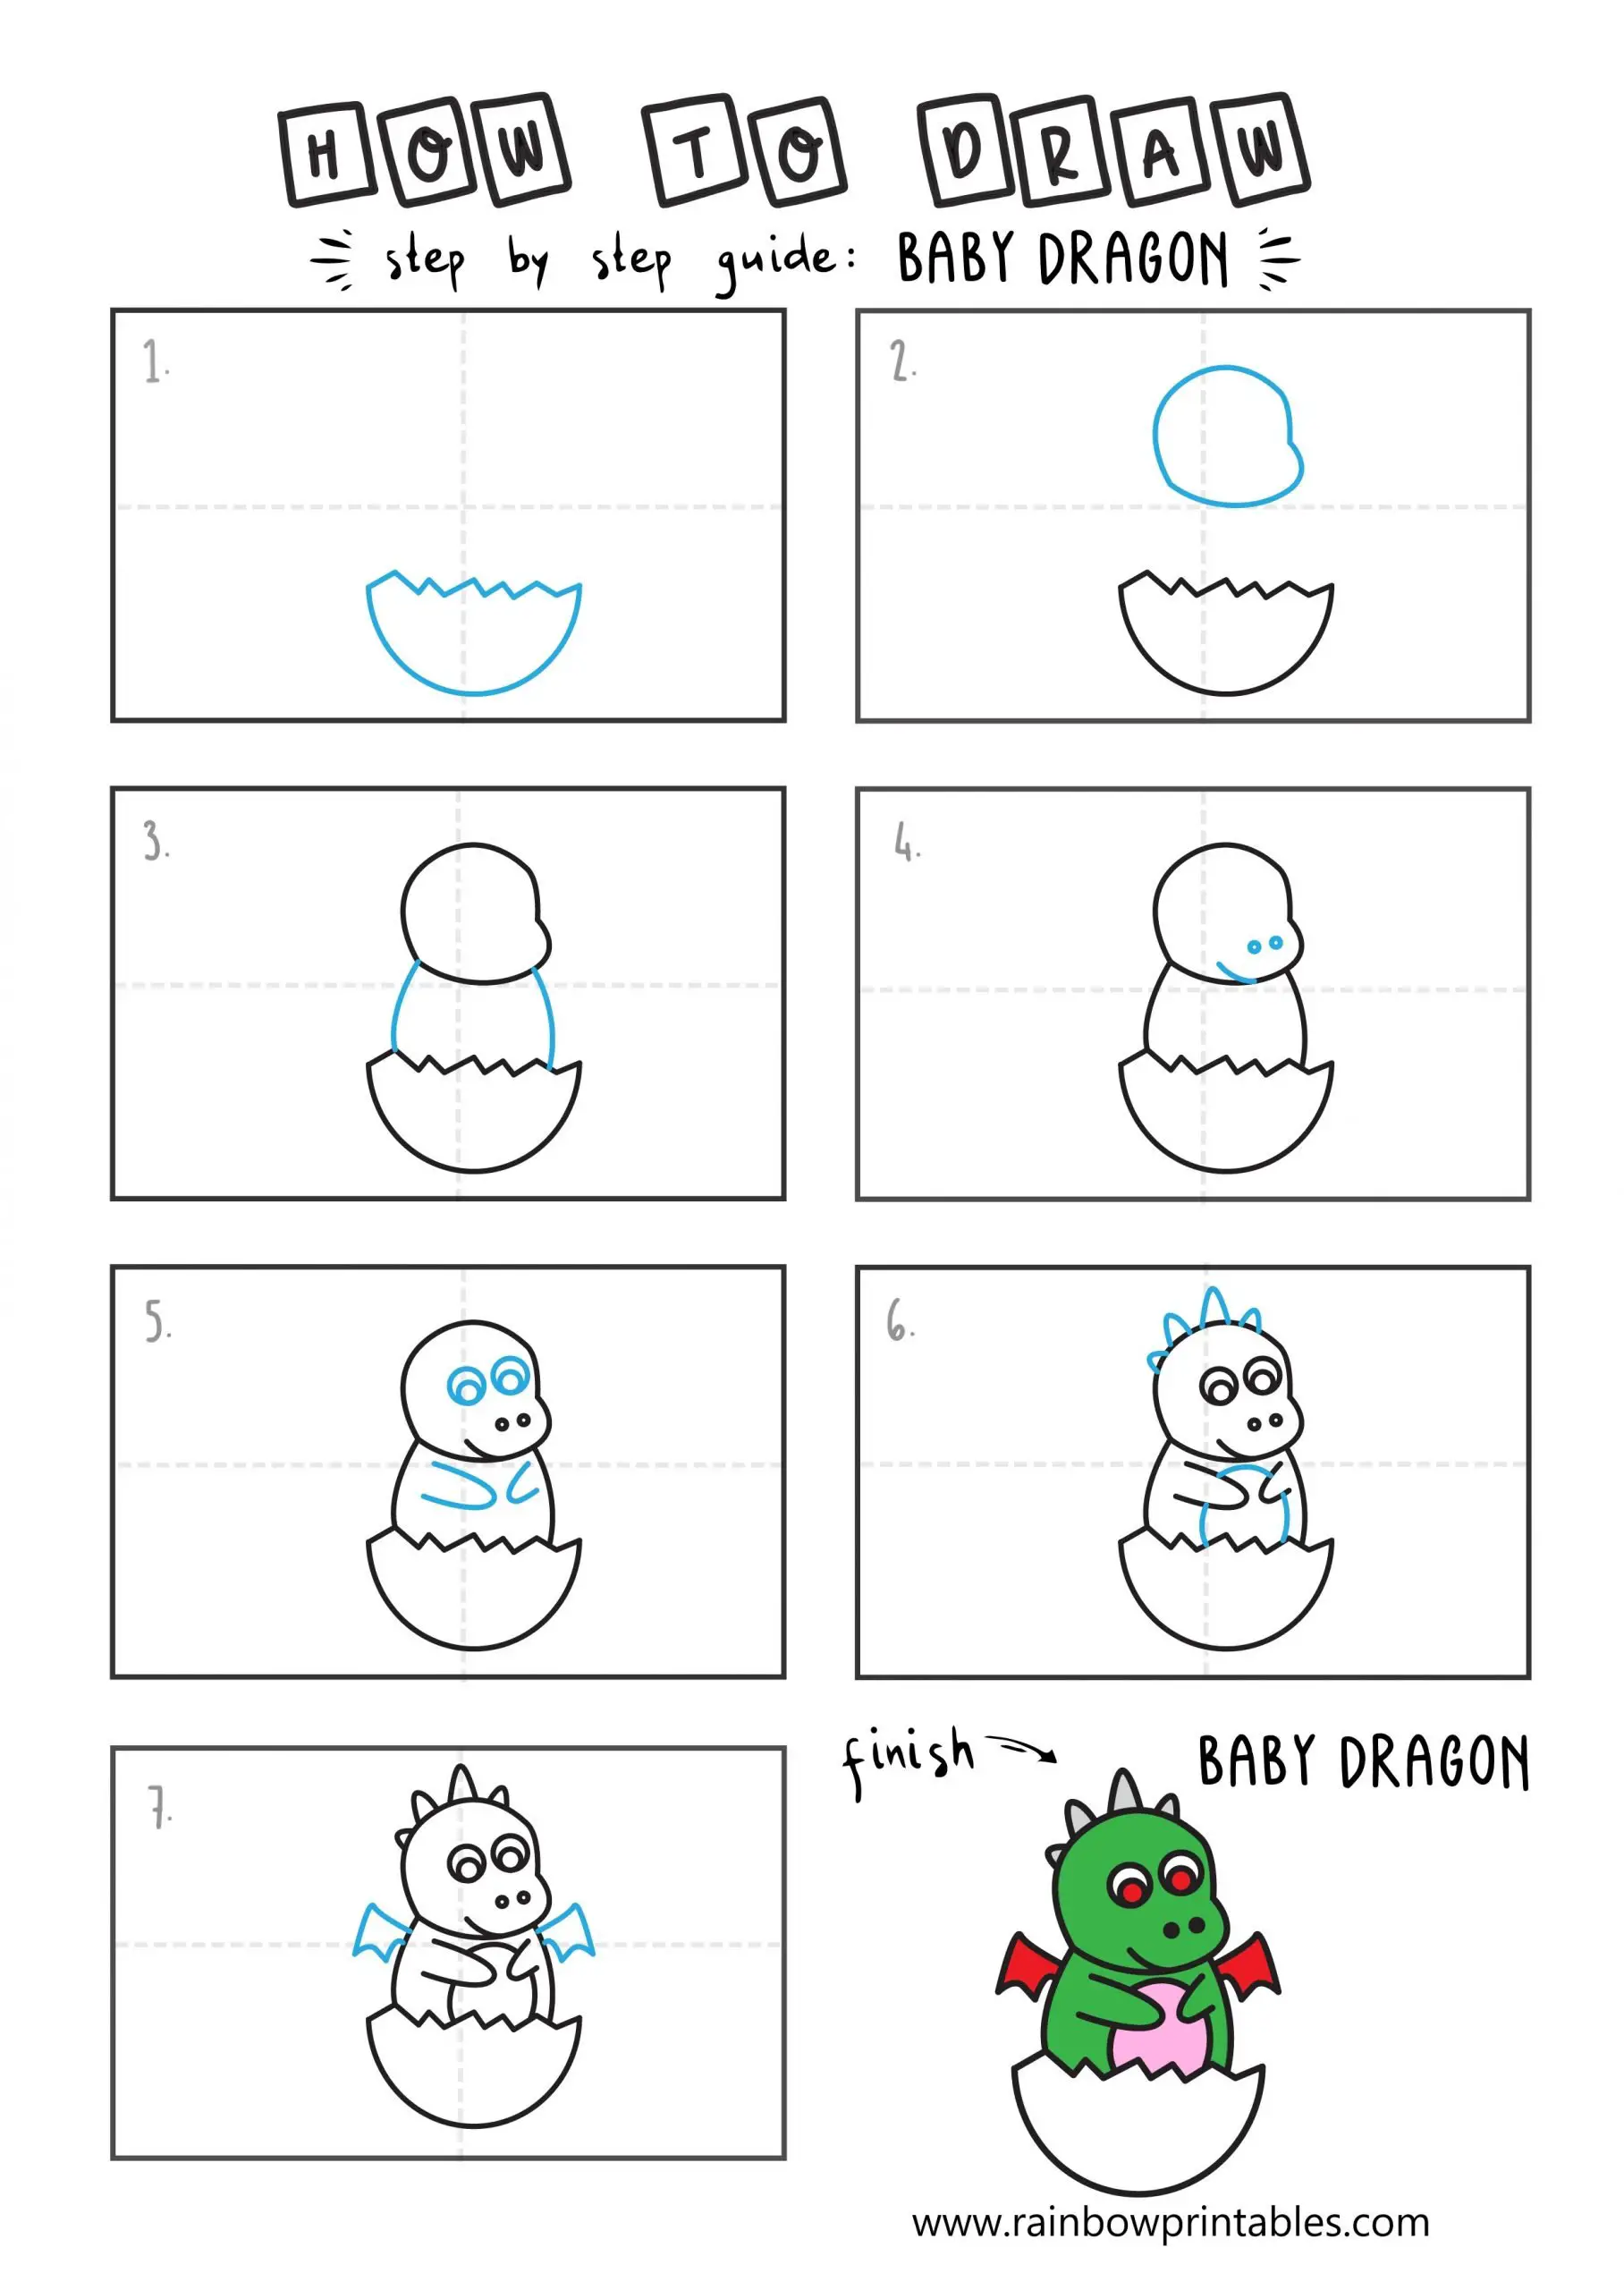 How To Draw a BABY DRAGON Easy Step By Step For Kids Illustration Art Ideas